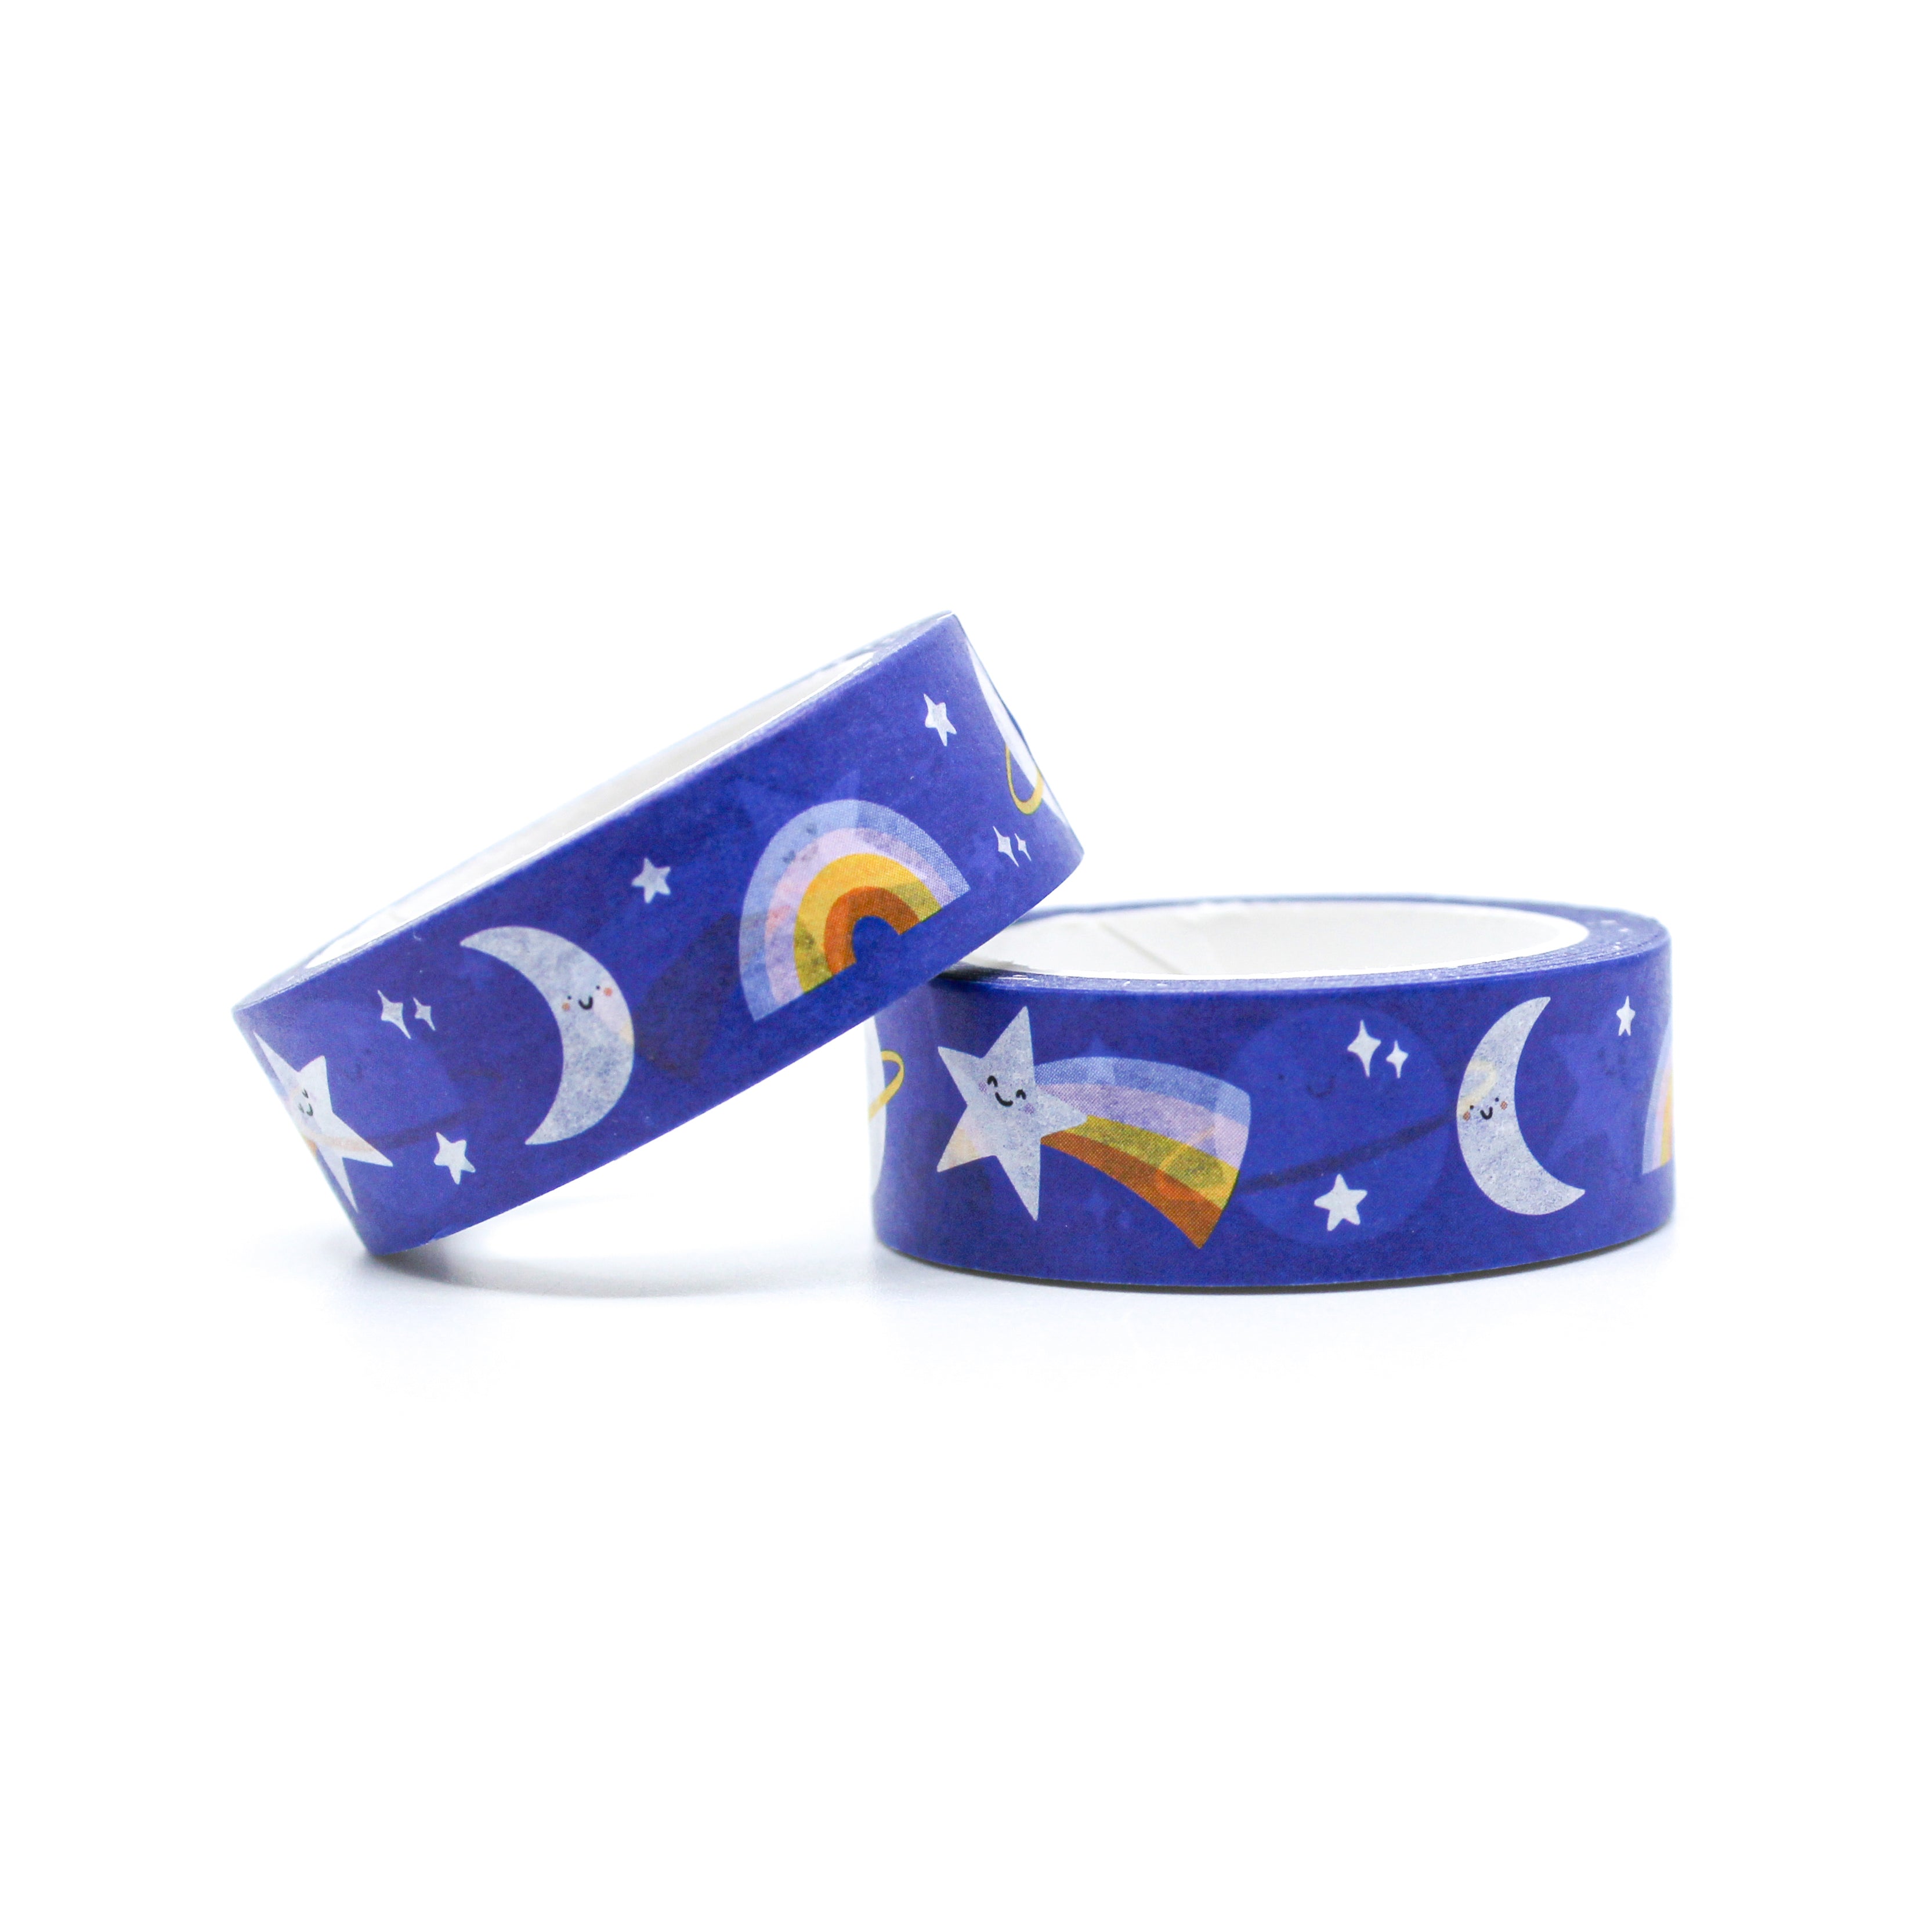 This is a roll of blue rainbow cosmos outer space washi tapes from BBB Supplies Craft Shop